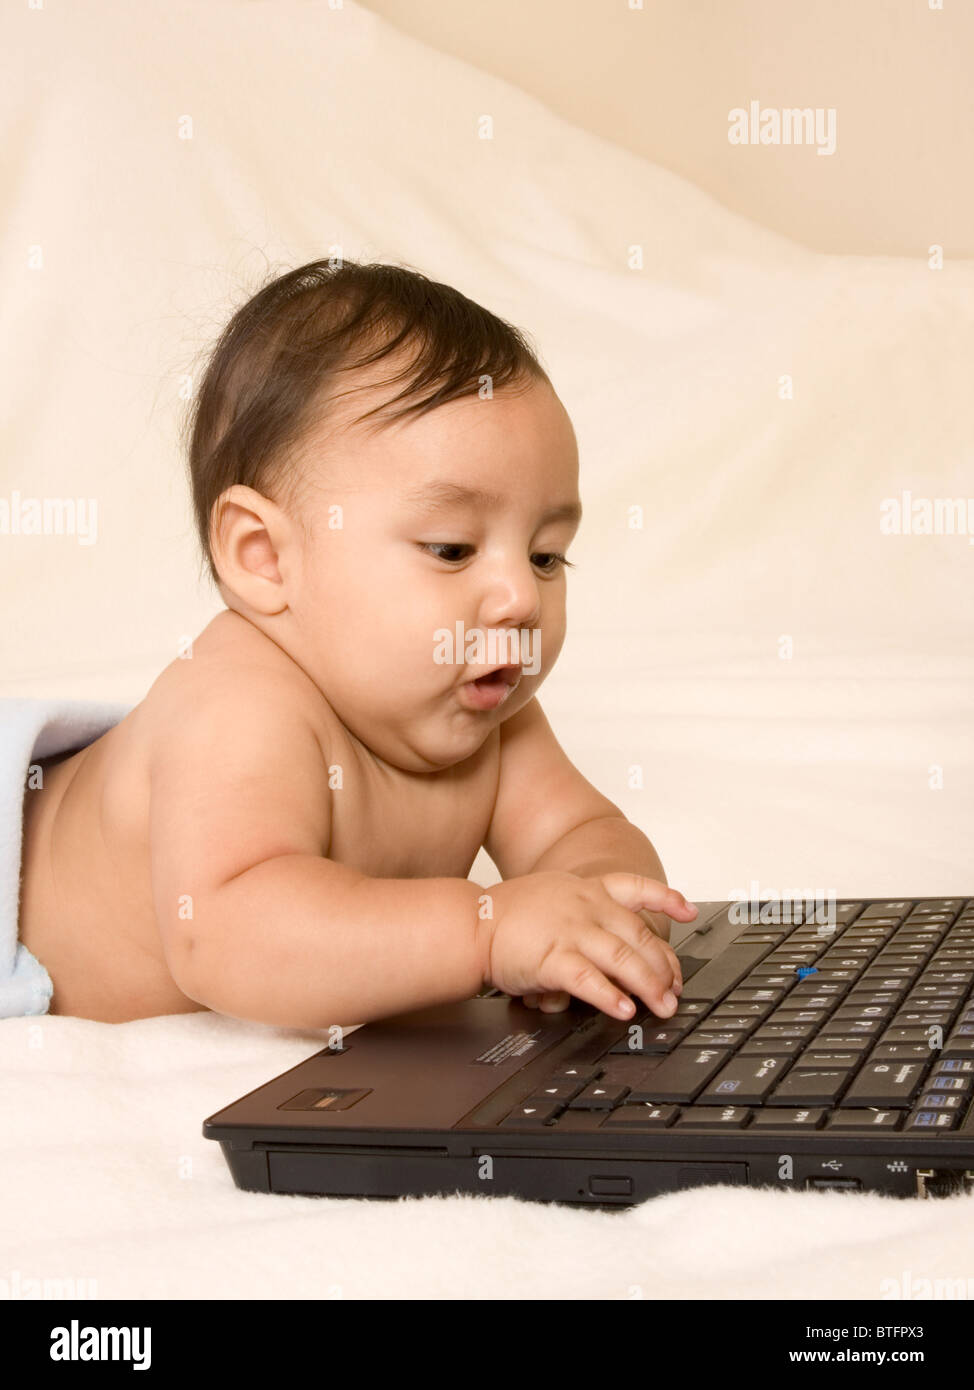 Baby playing with notebook computer keyboard, typing on it Stock Photo